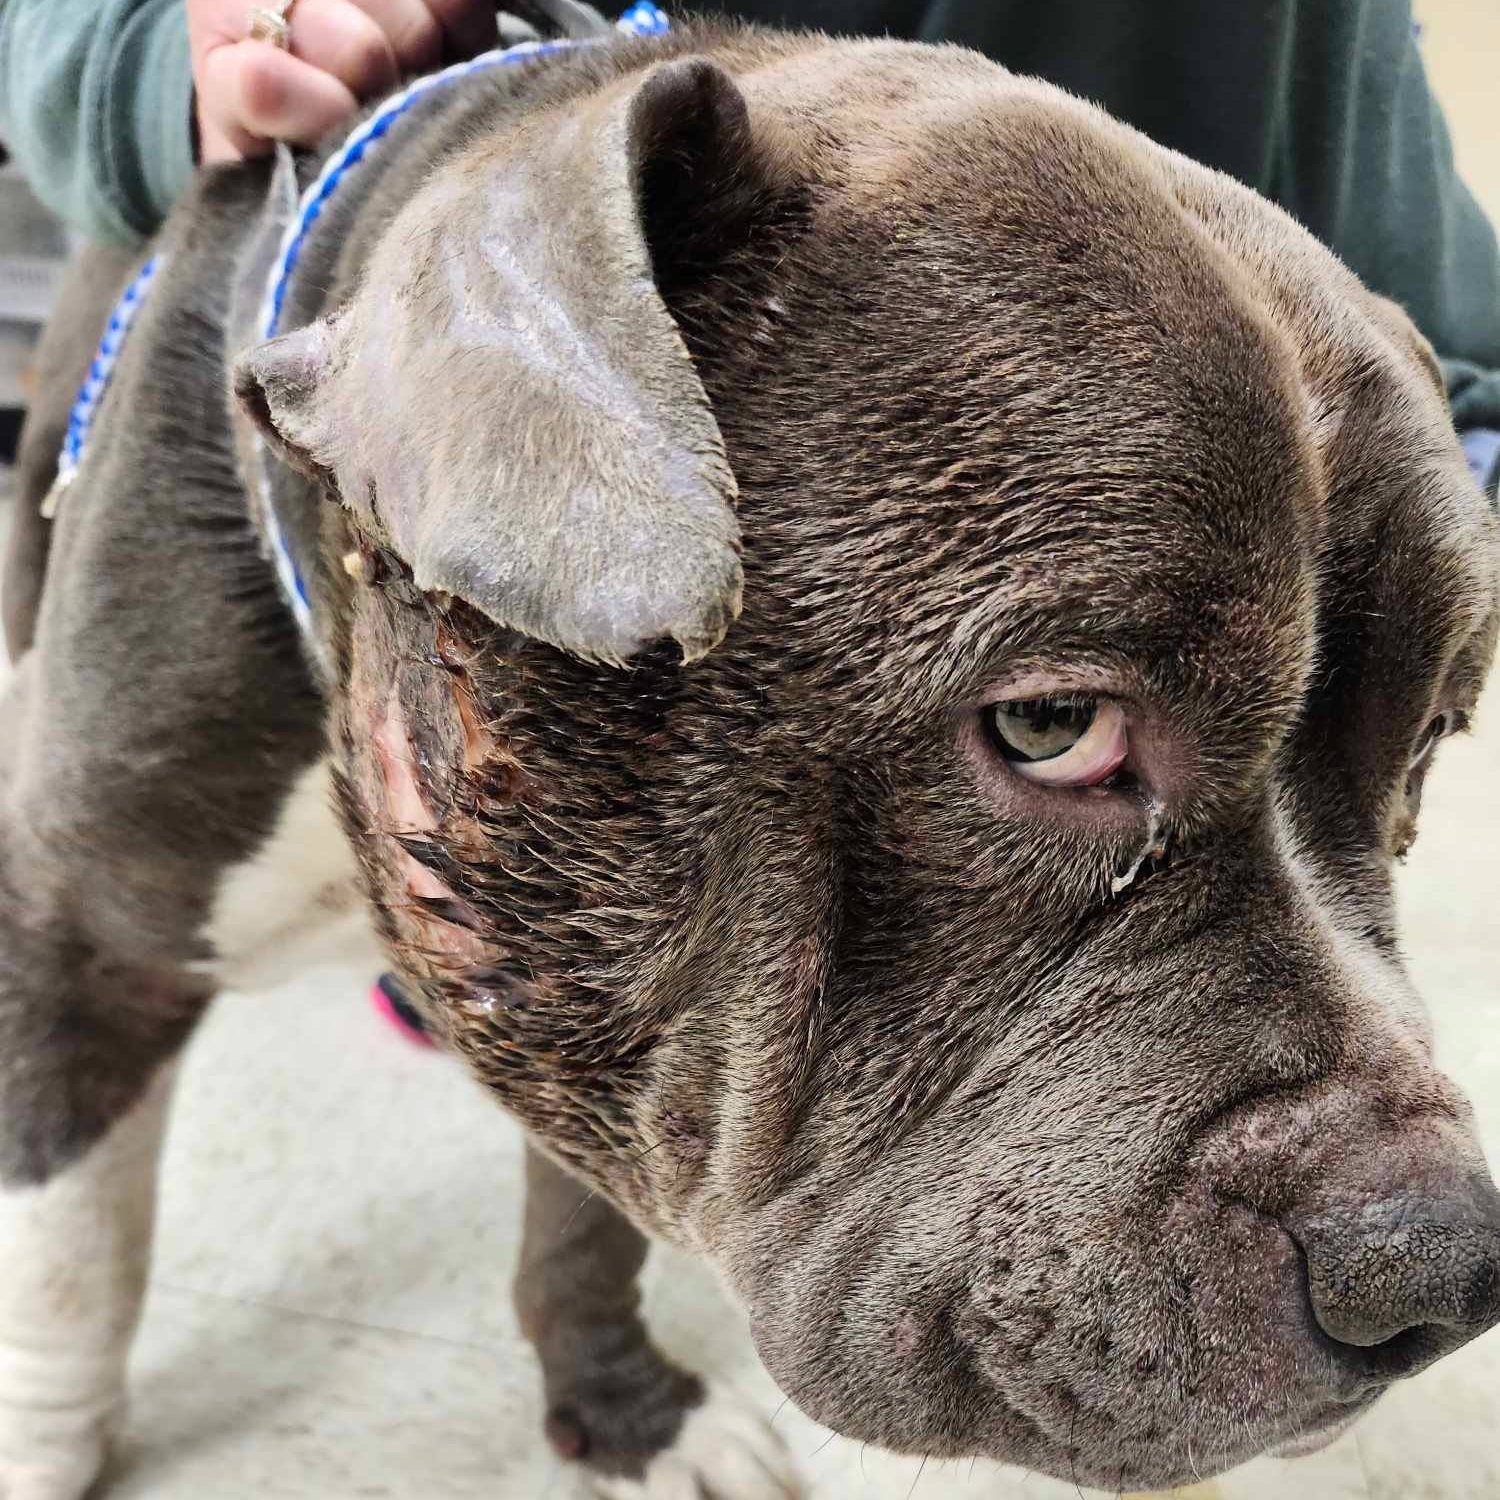 A.N.N.A. Shelter Rescues Discarded Dog Used in Illegal Fights